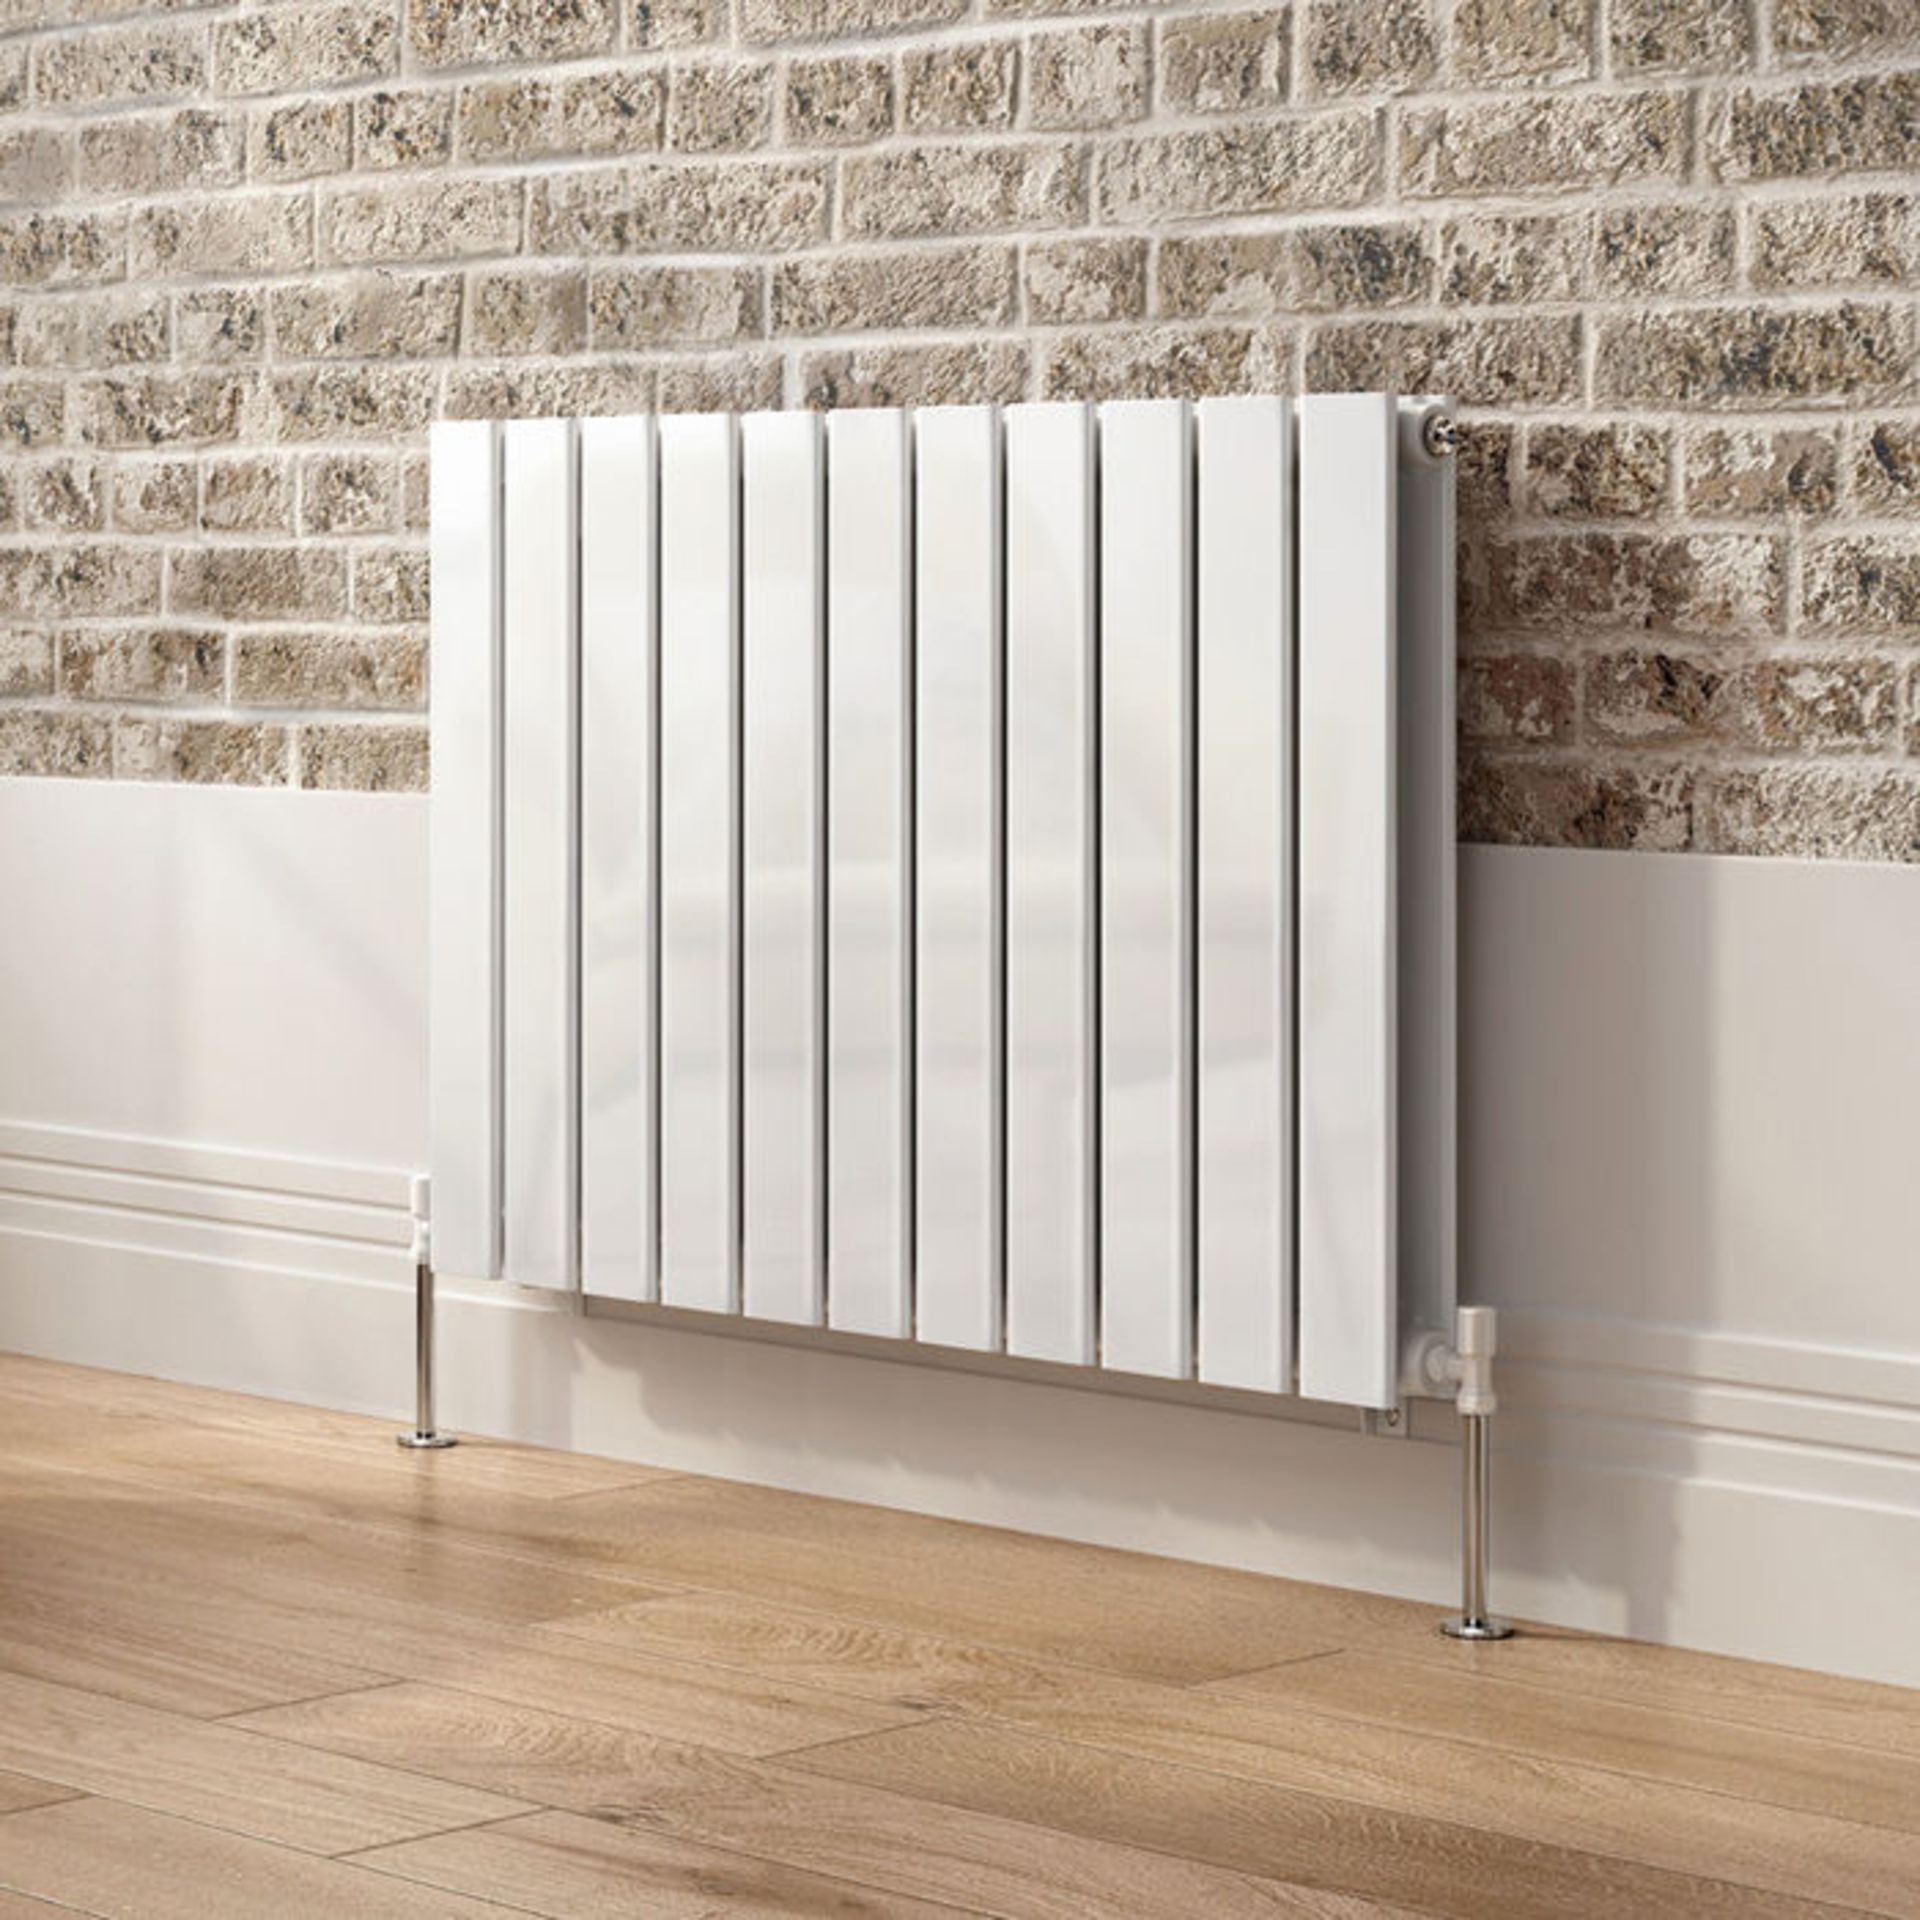 600x830mm Gloss White Double Flat Panel Horizontal Radiator. RRP £574.99. RC221 Made with hig... - Image 3 of 3